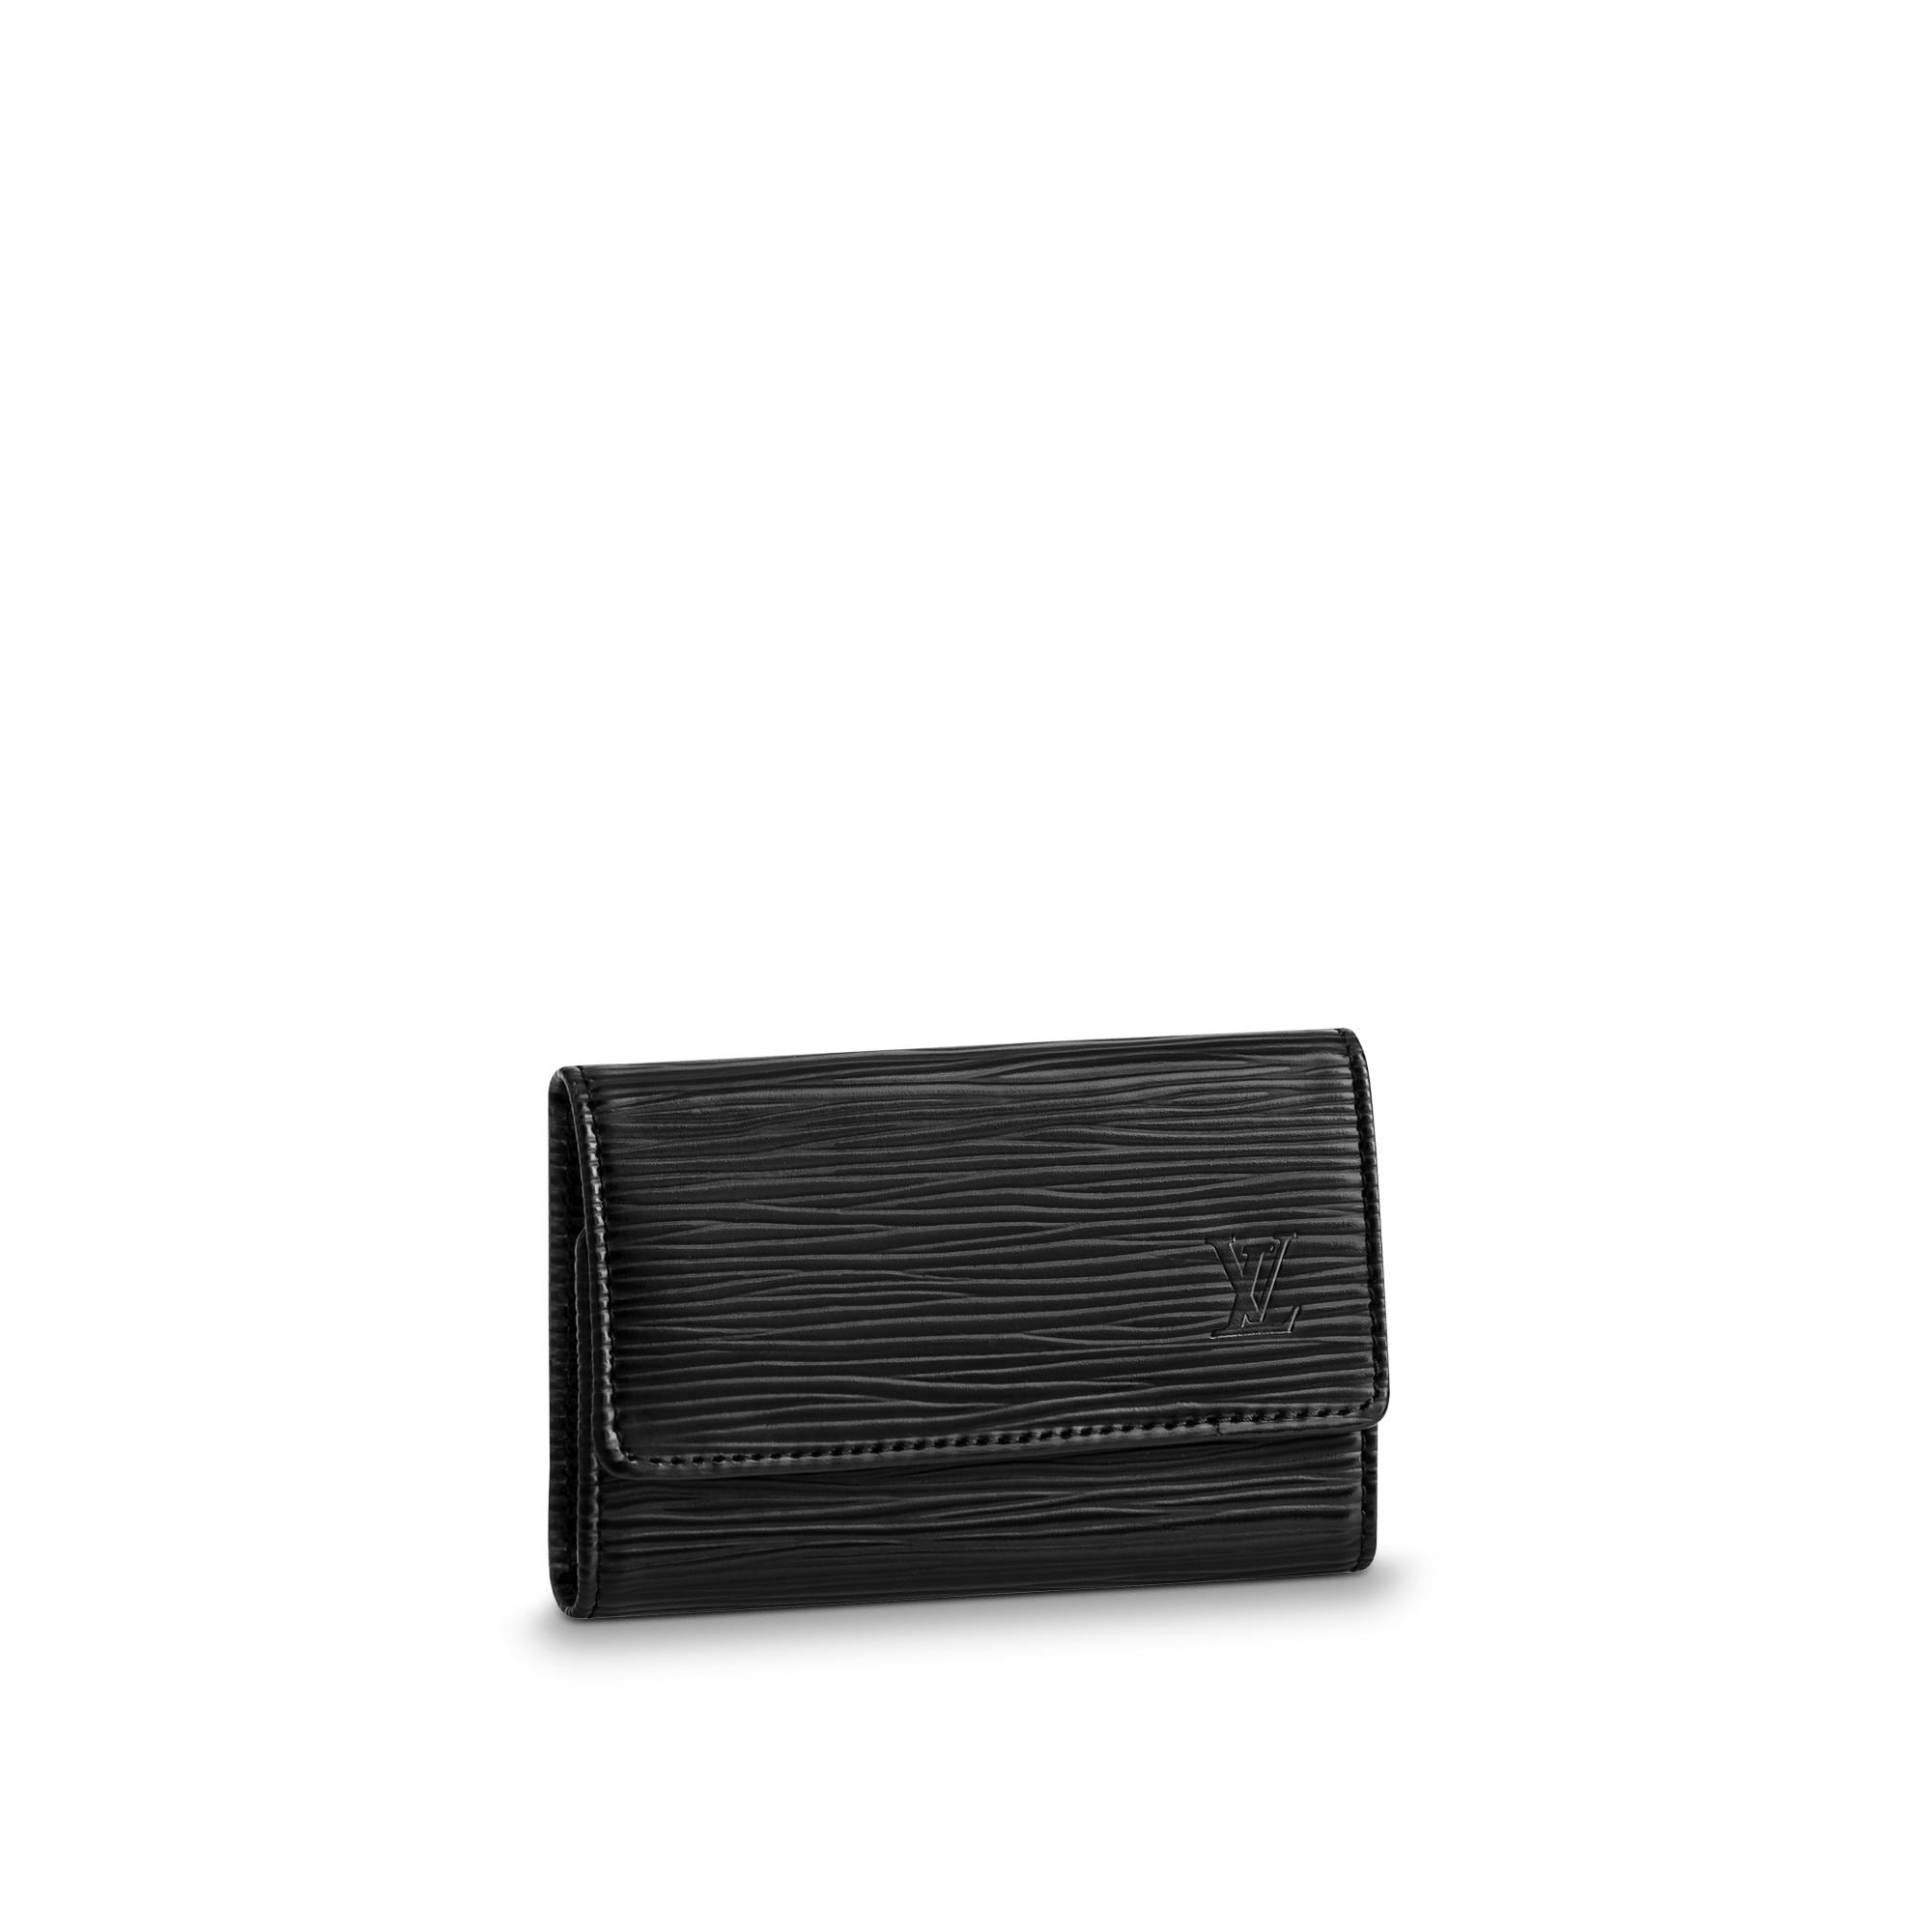 Louis Vuitton 6 Key Holder Epi Leather in Black – Small Leather Goods M63812